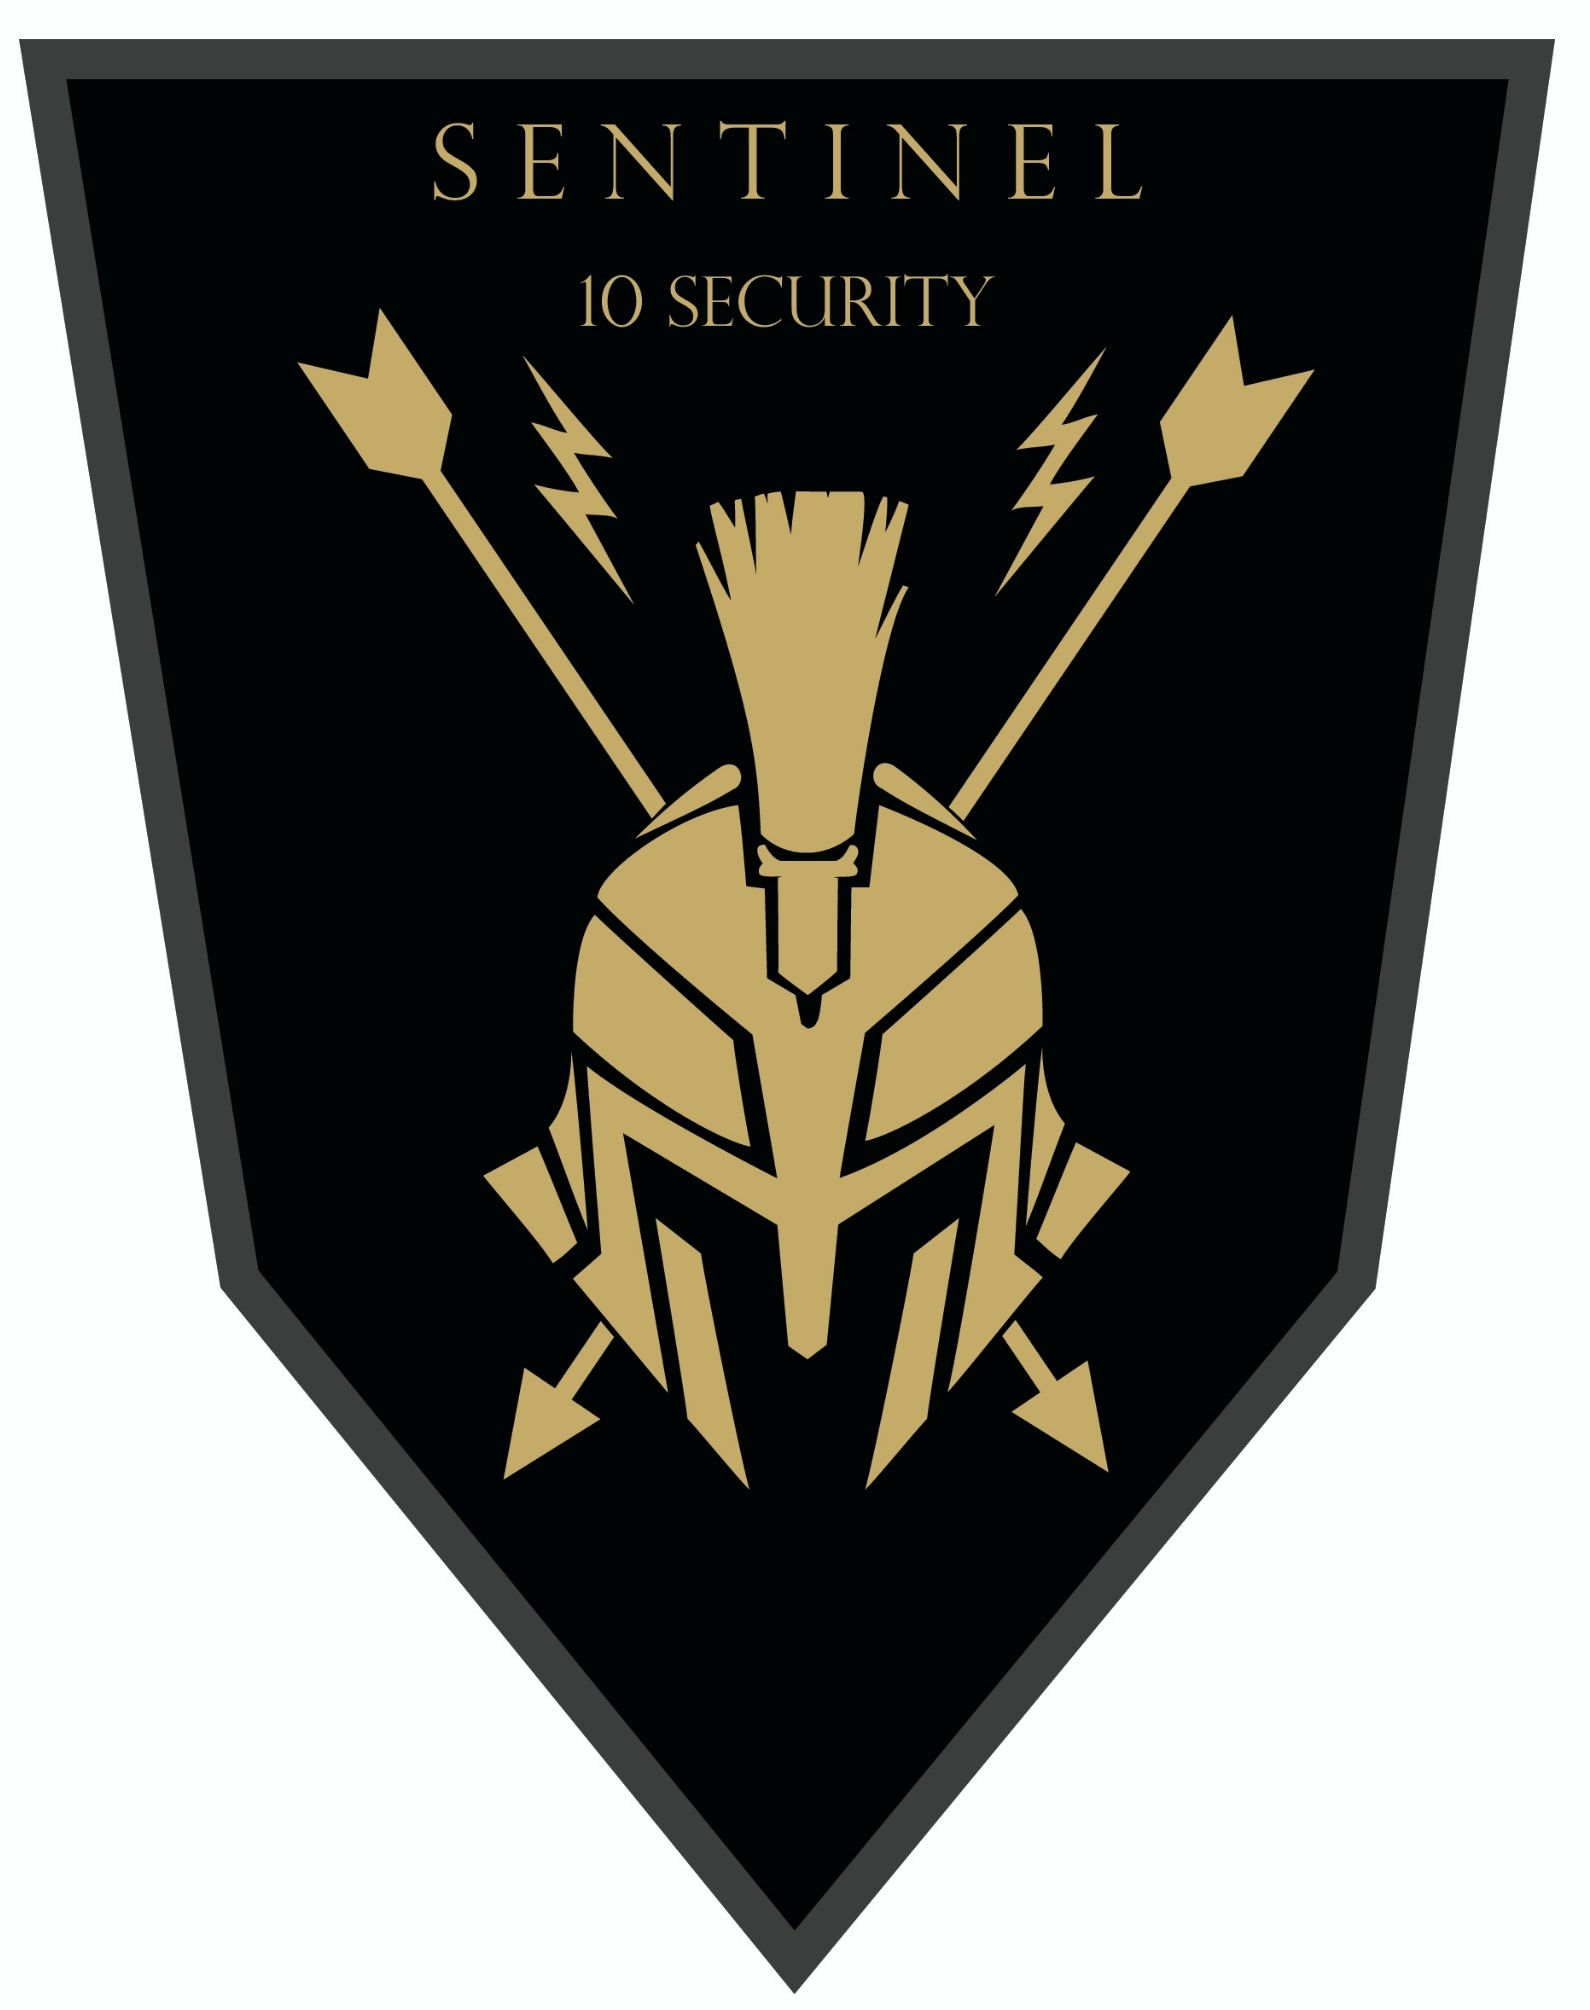 Sentinel 10 Security, Uniforms and Community Relation Supplies